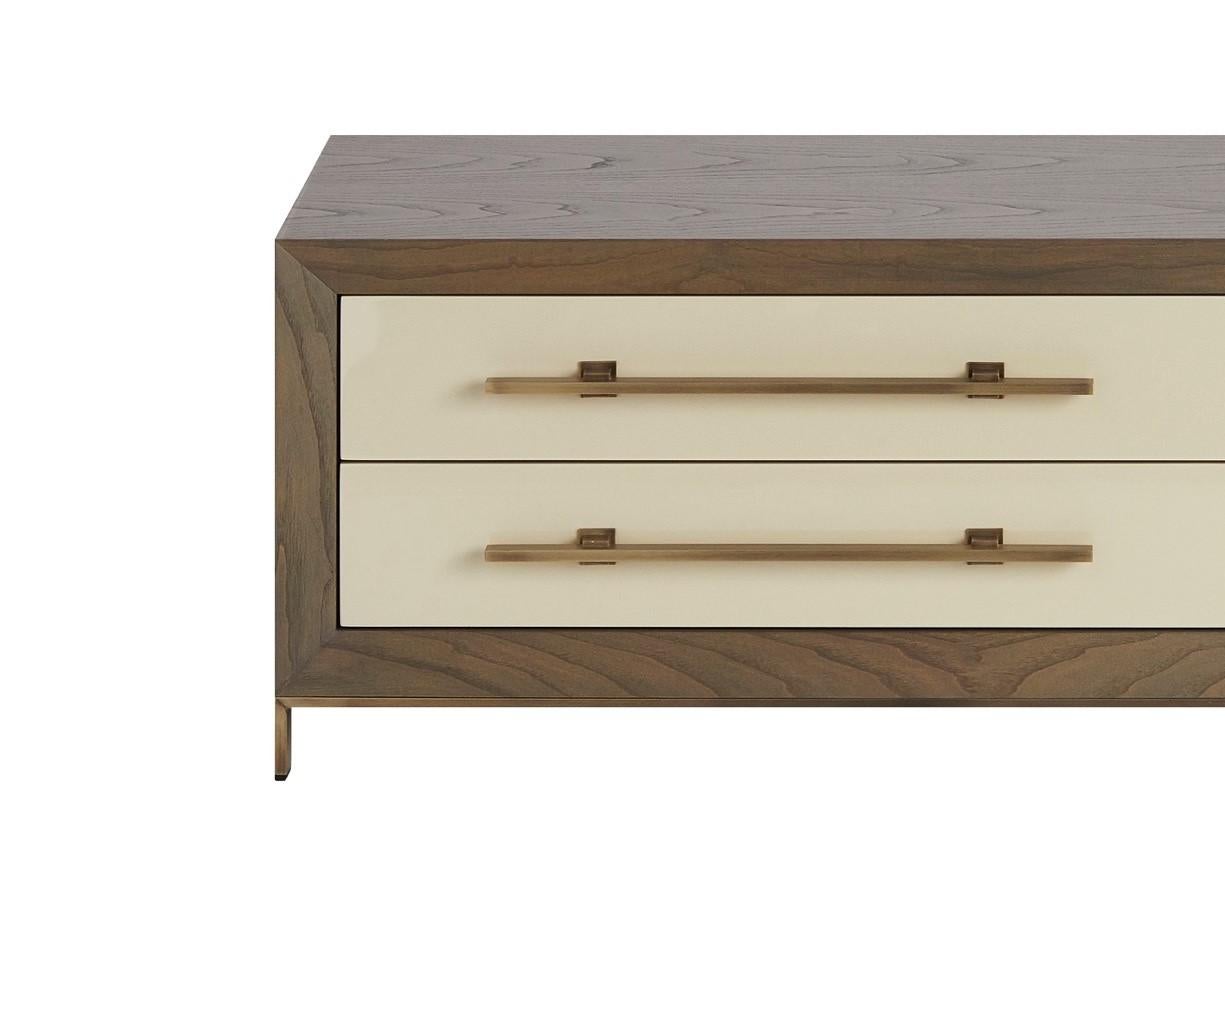 A must-have for any living room. Ready to answer all your media needs.

Shown in Matte Chestnut III structure combined with lacquered drawers in CM3 color and antique brass handles and feet.
 